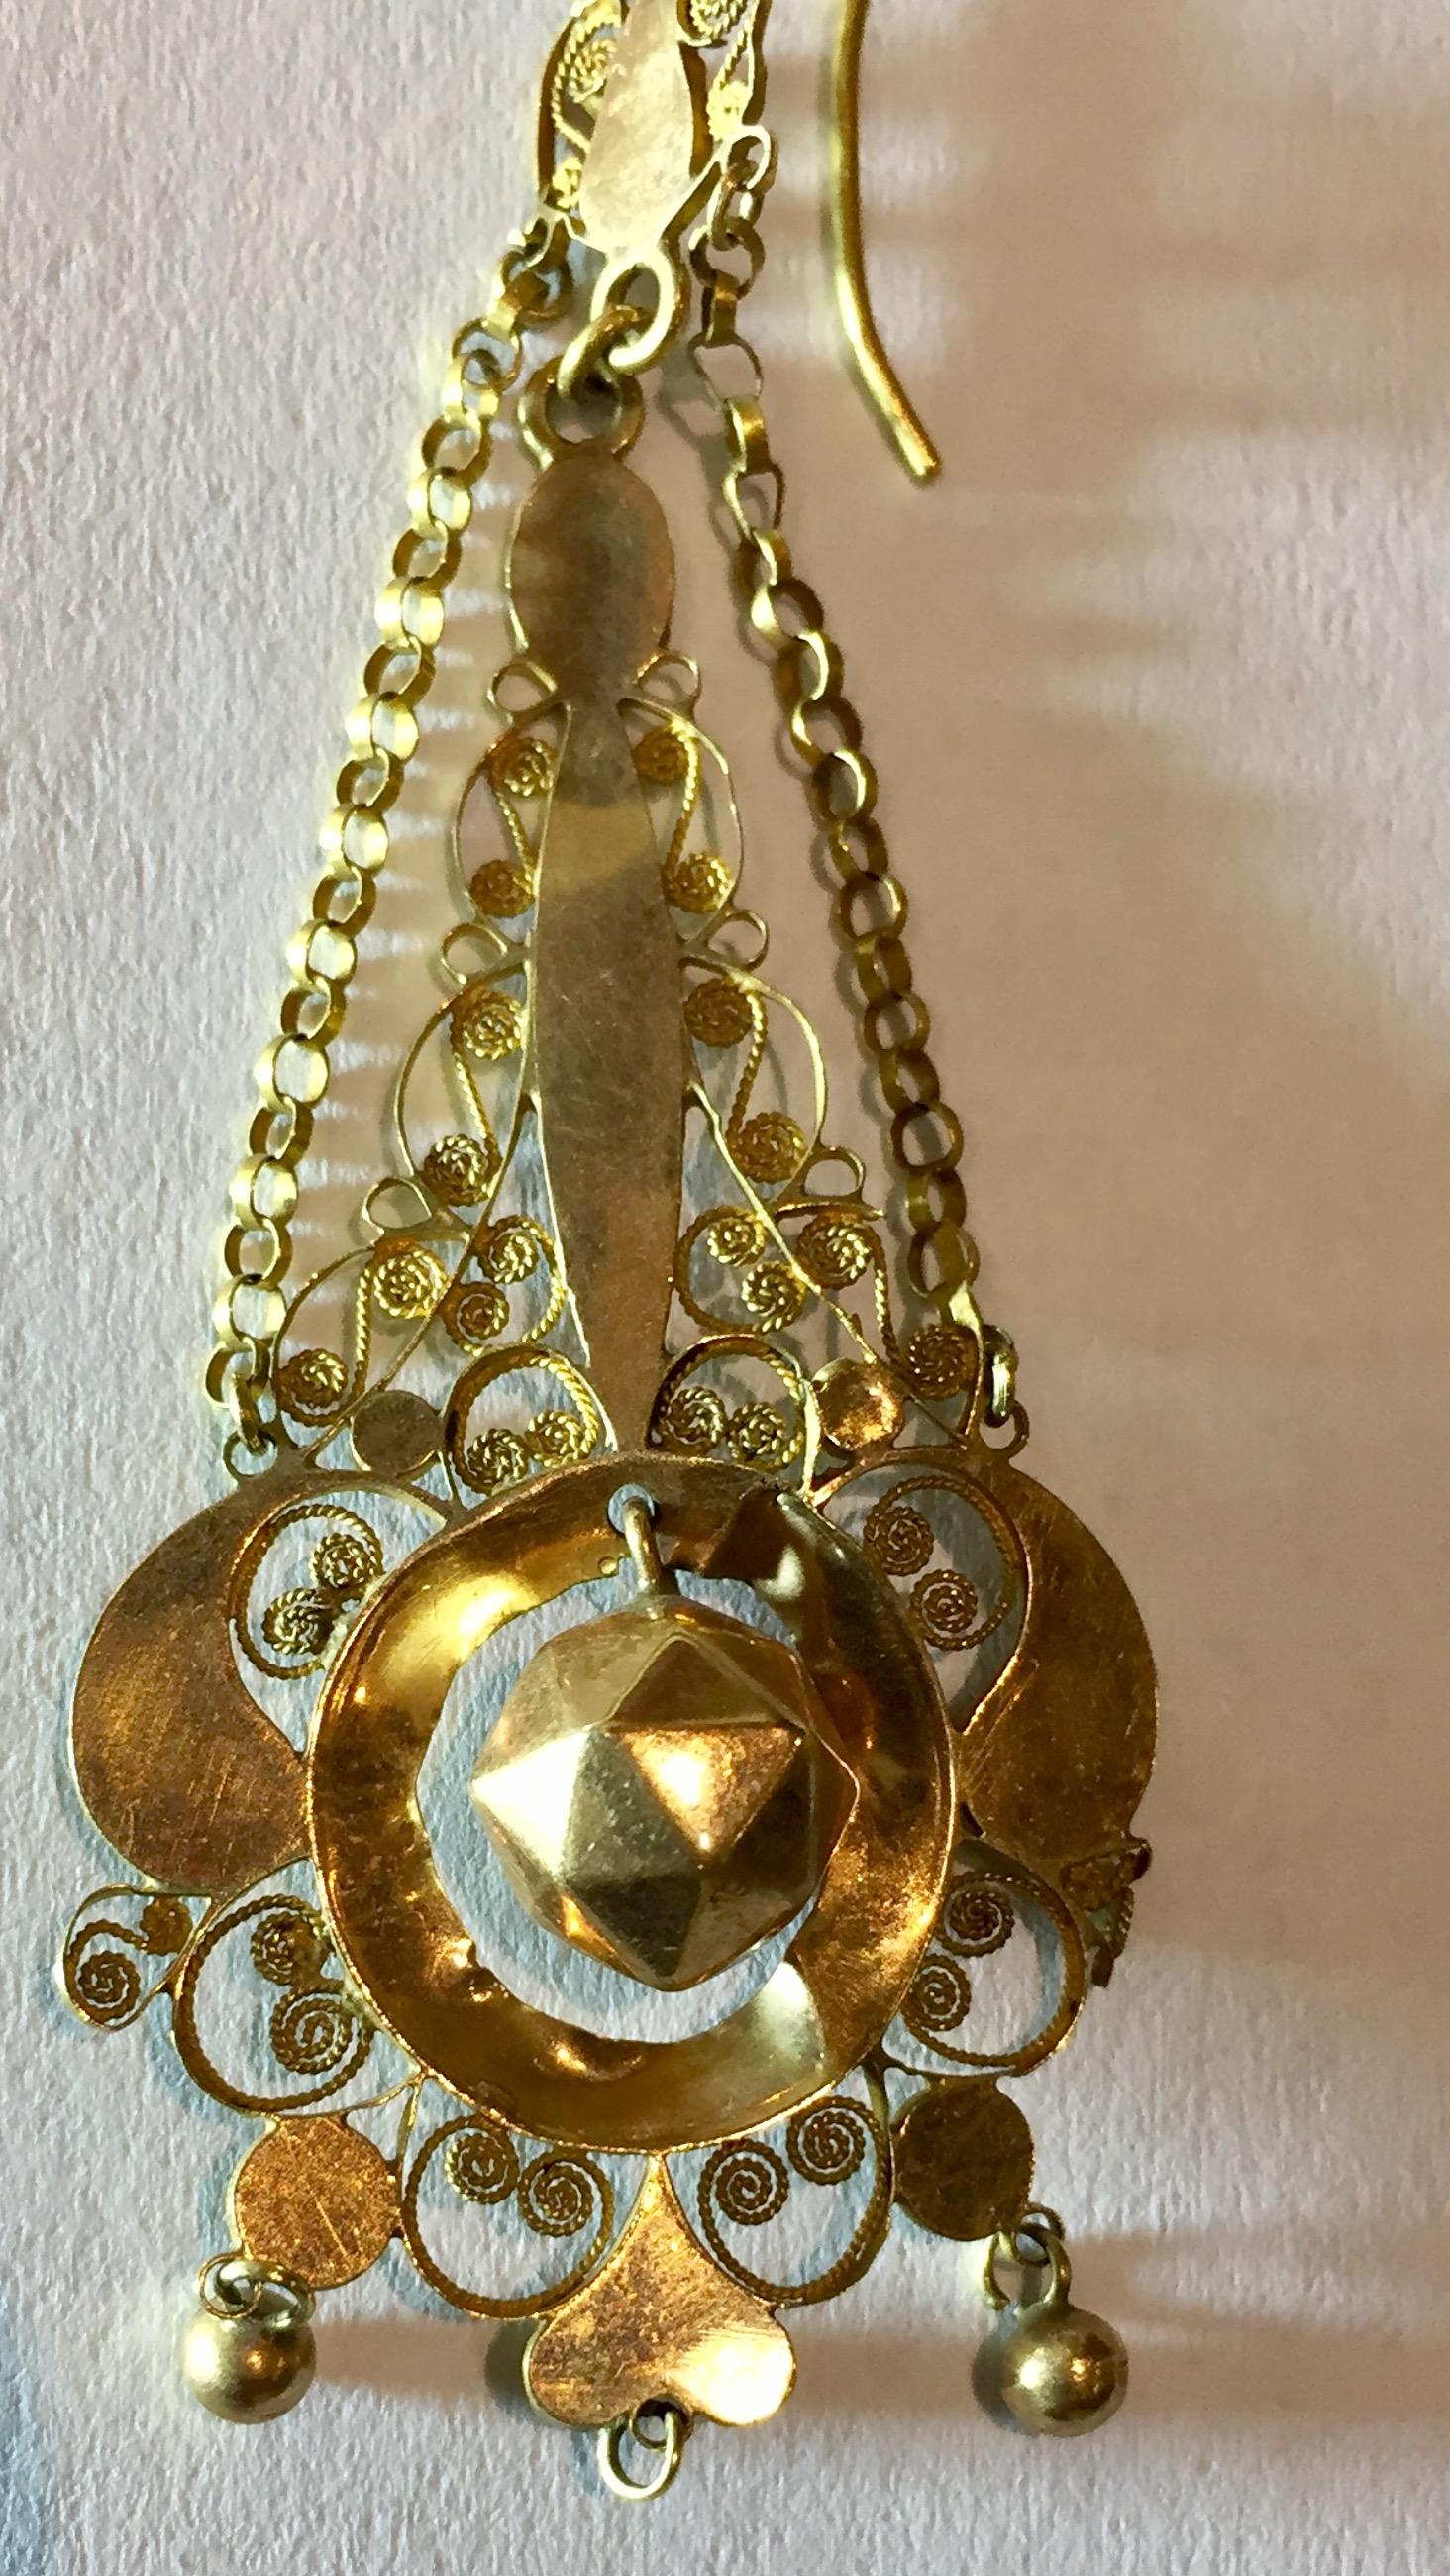 Gold Filigree Earrings 18 Karat In Good Condition For Sale In Palermo, IT